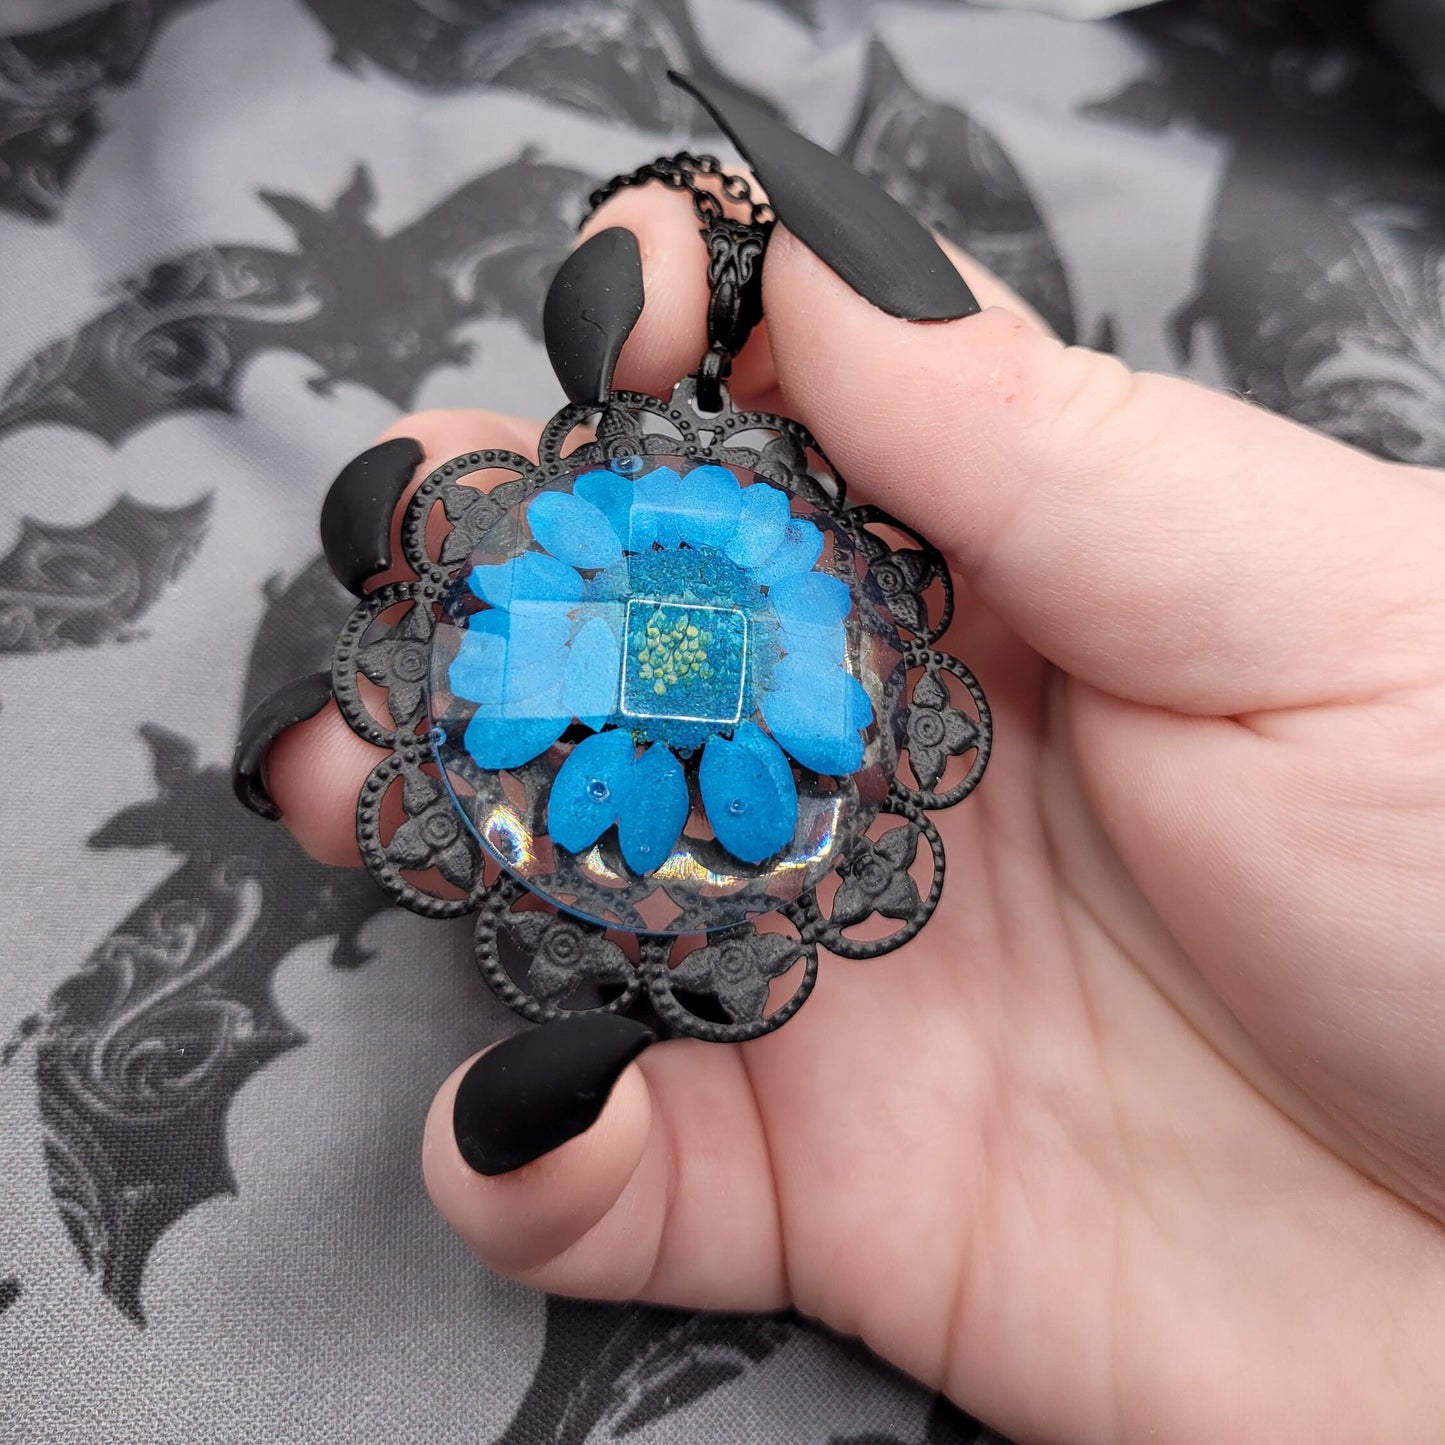 Unique Handmade Black and Blue Resin Faceted Cabochon Pendant Necklace with Dried Pressed Blue Flower and Black Filigree